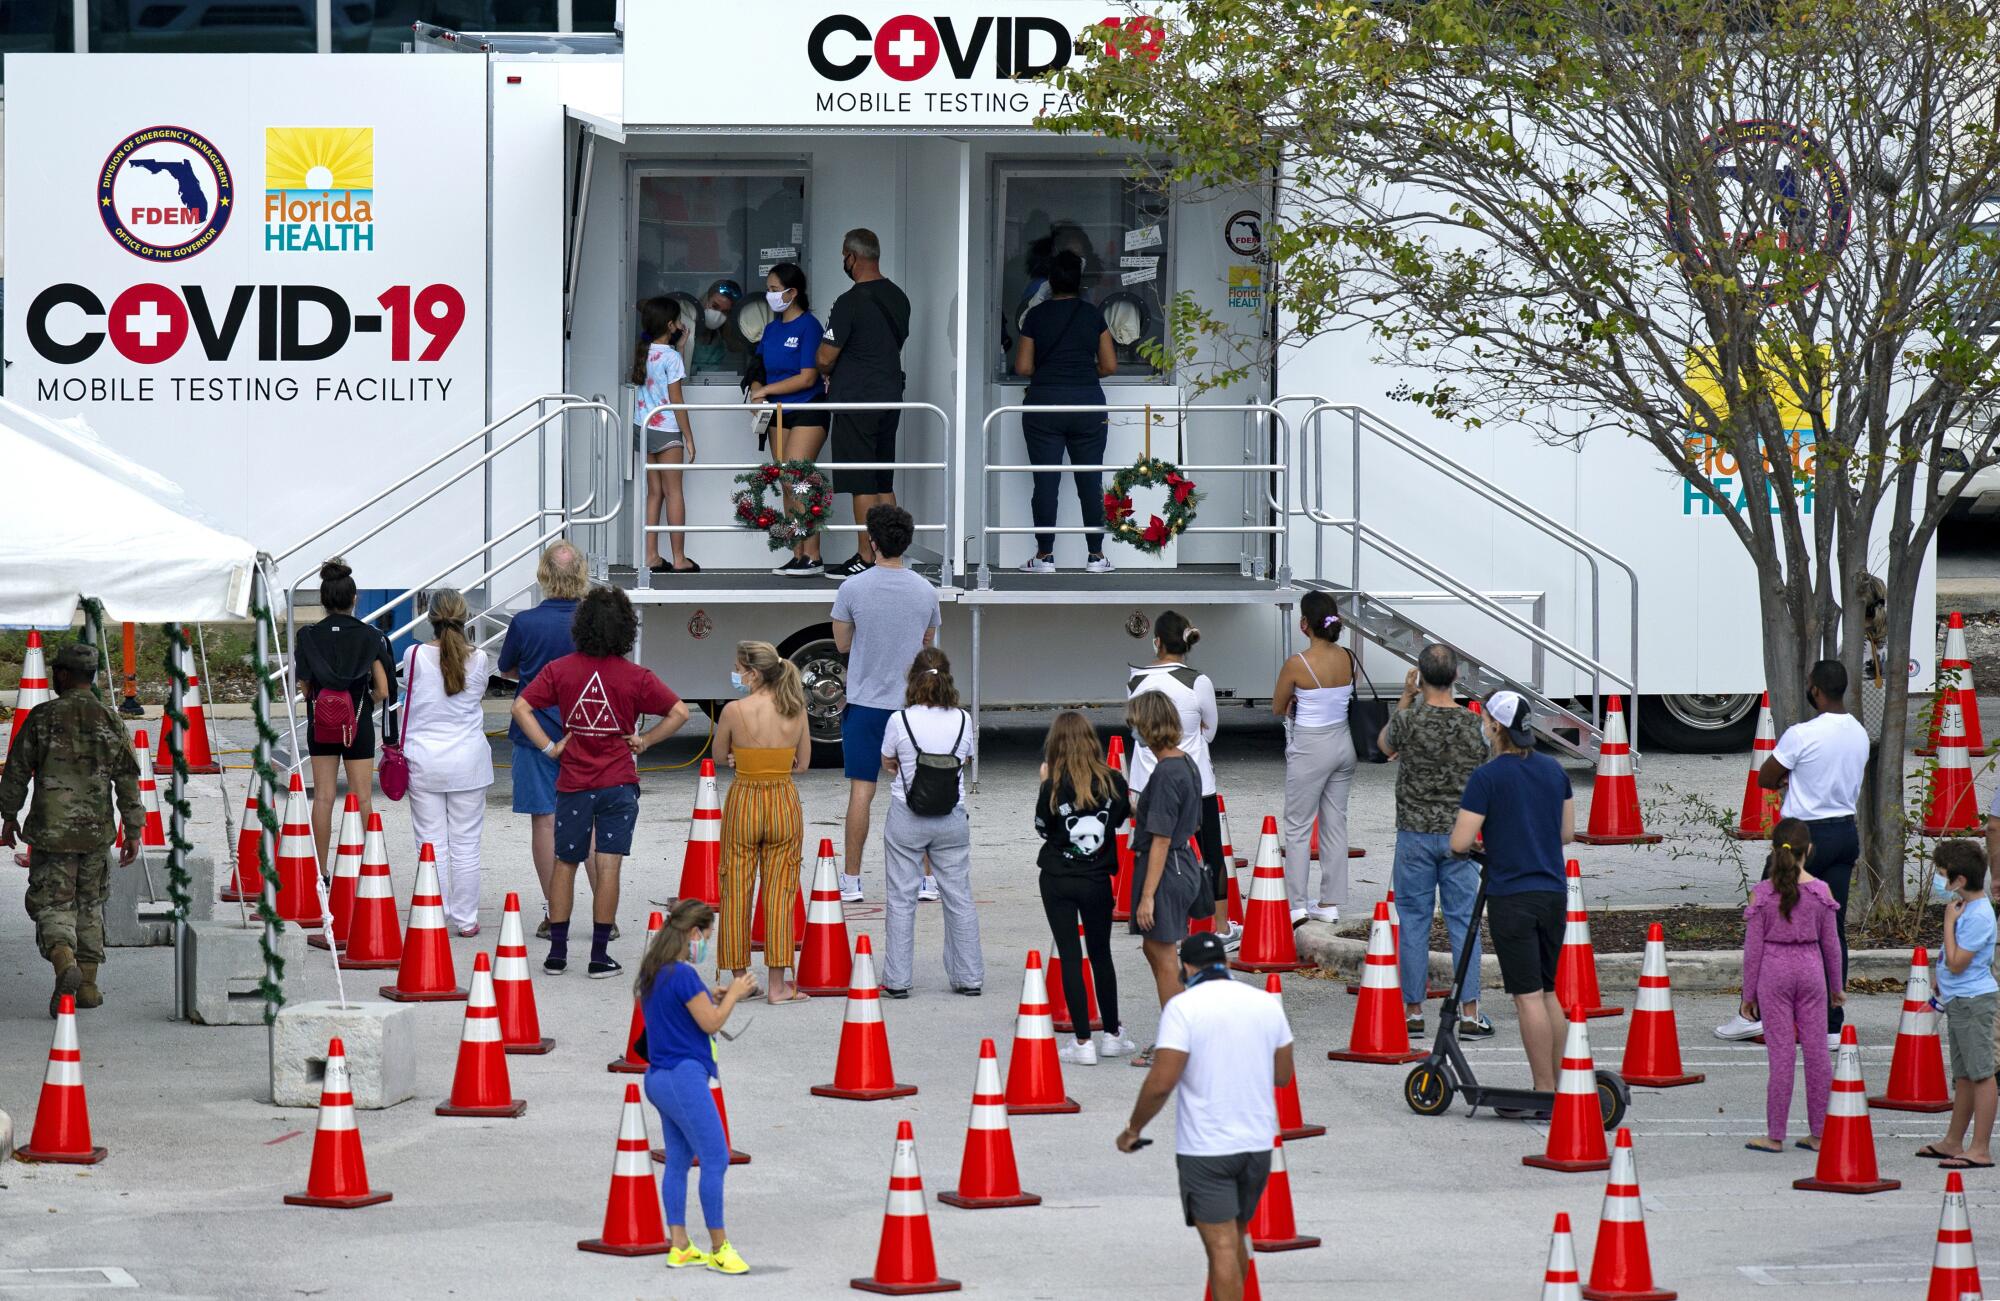 People stand in line to be tested at a coronavirus testing facility in Miami.